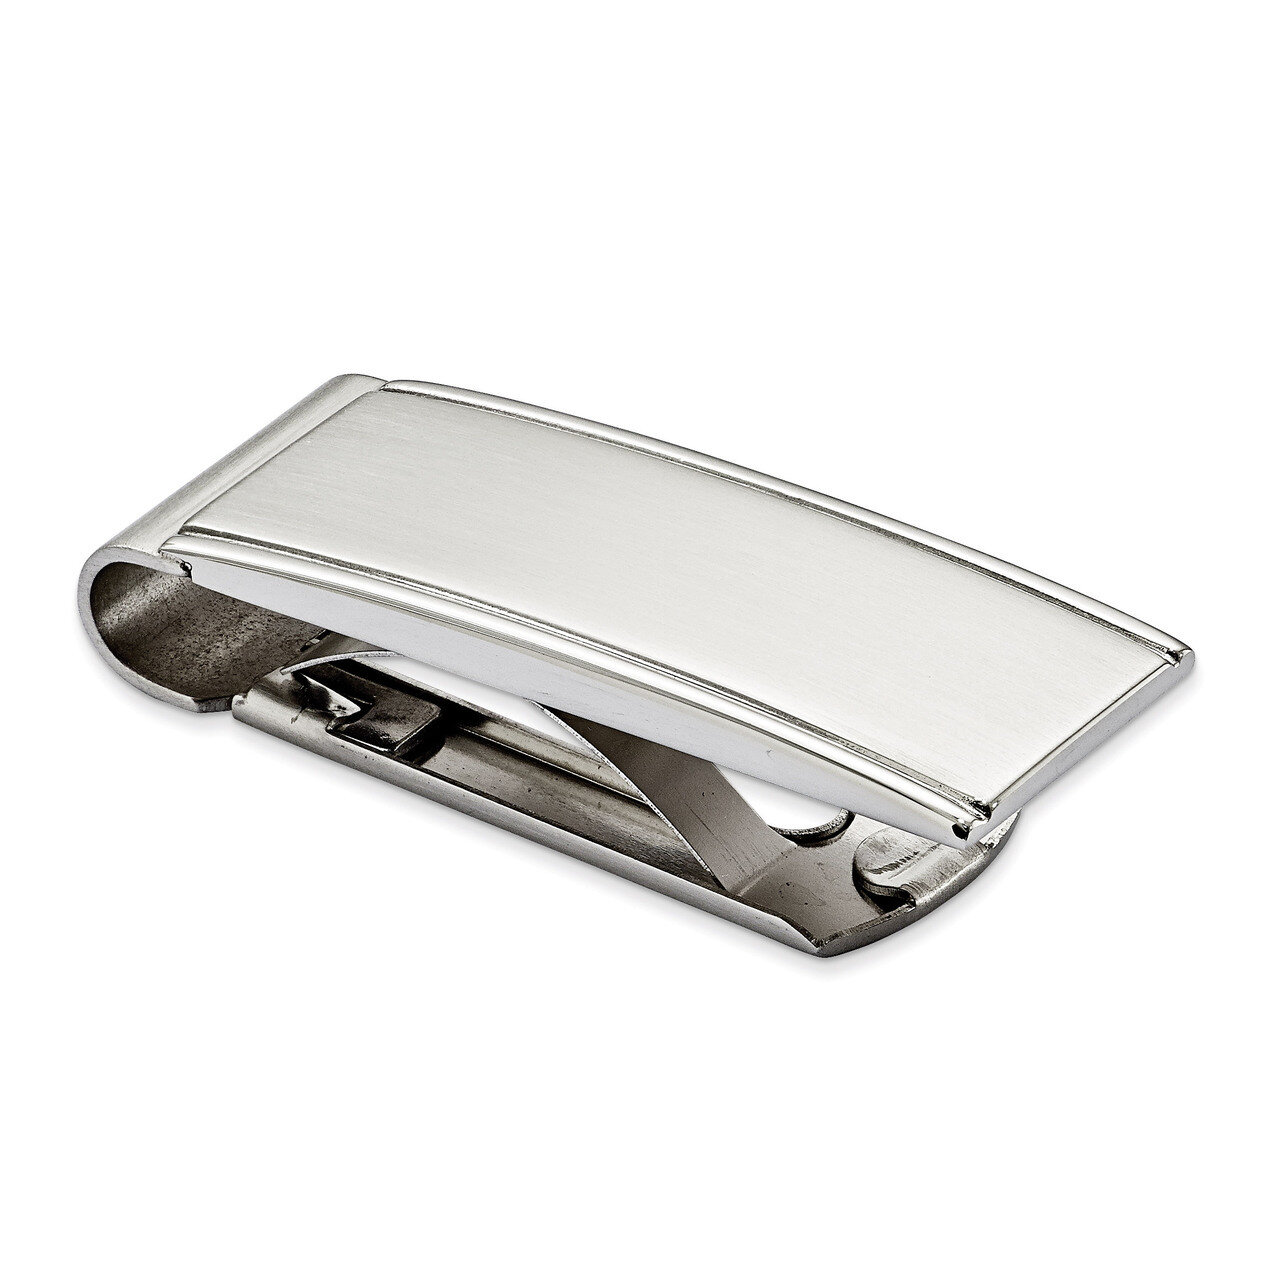 Brushed and Polished Money Clip - Stainless Steel SRM119